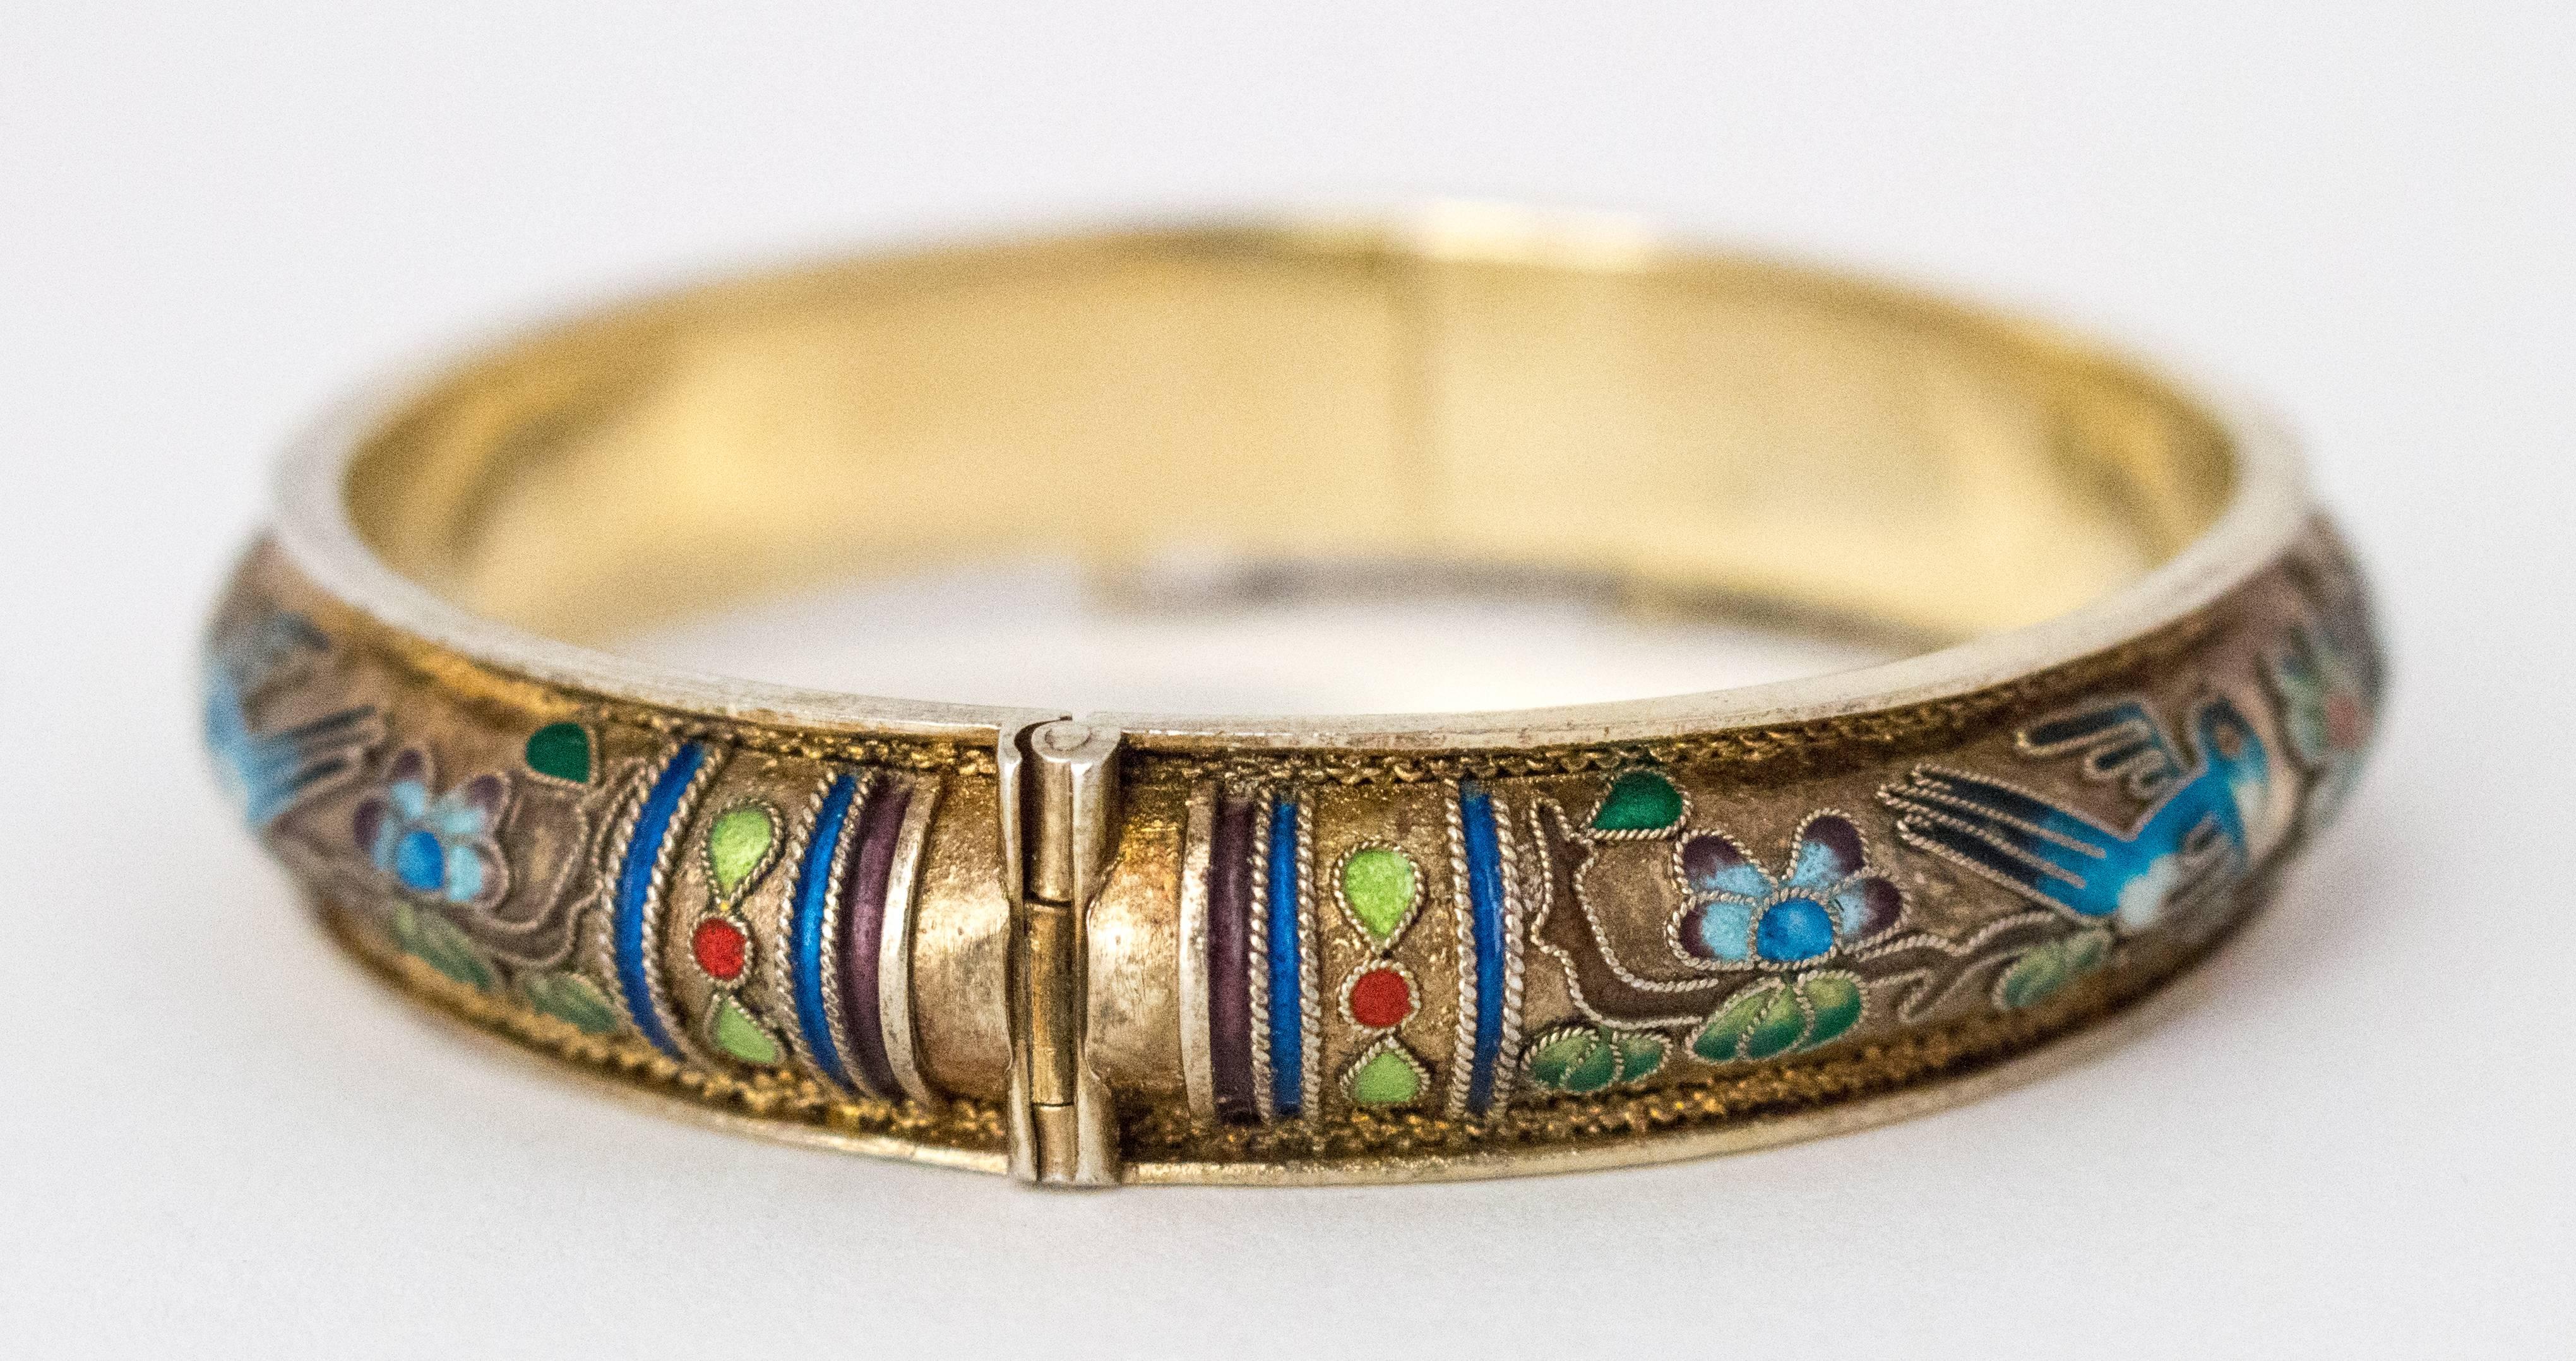 Women's 50s Champleve Silver Bangle with a Gold Wash, Enamel Blue Birds & Flowers